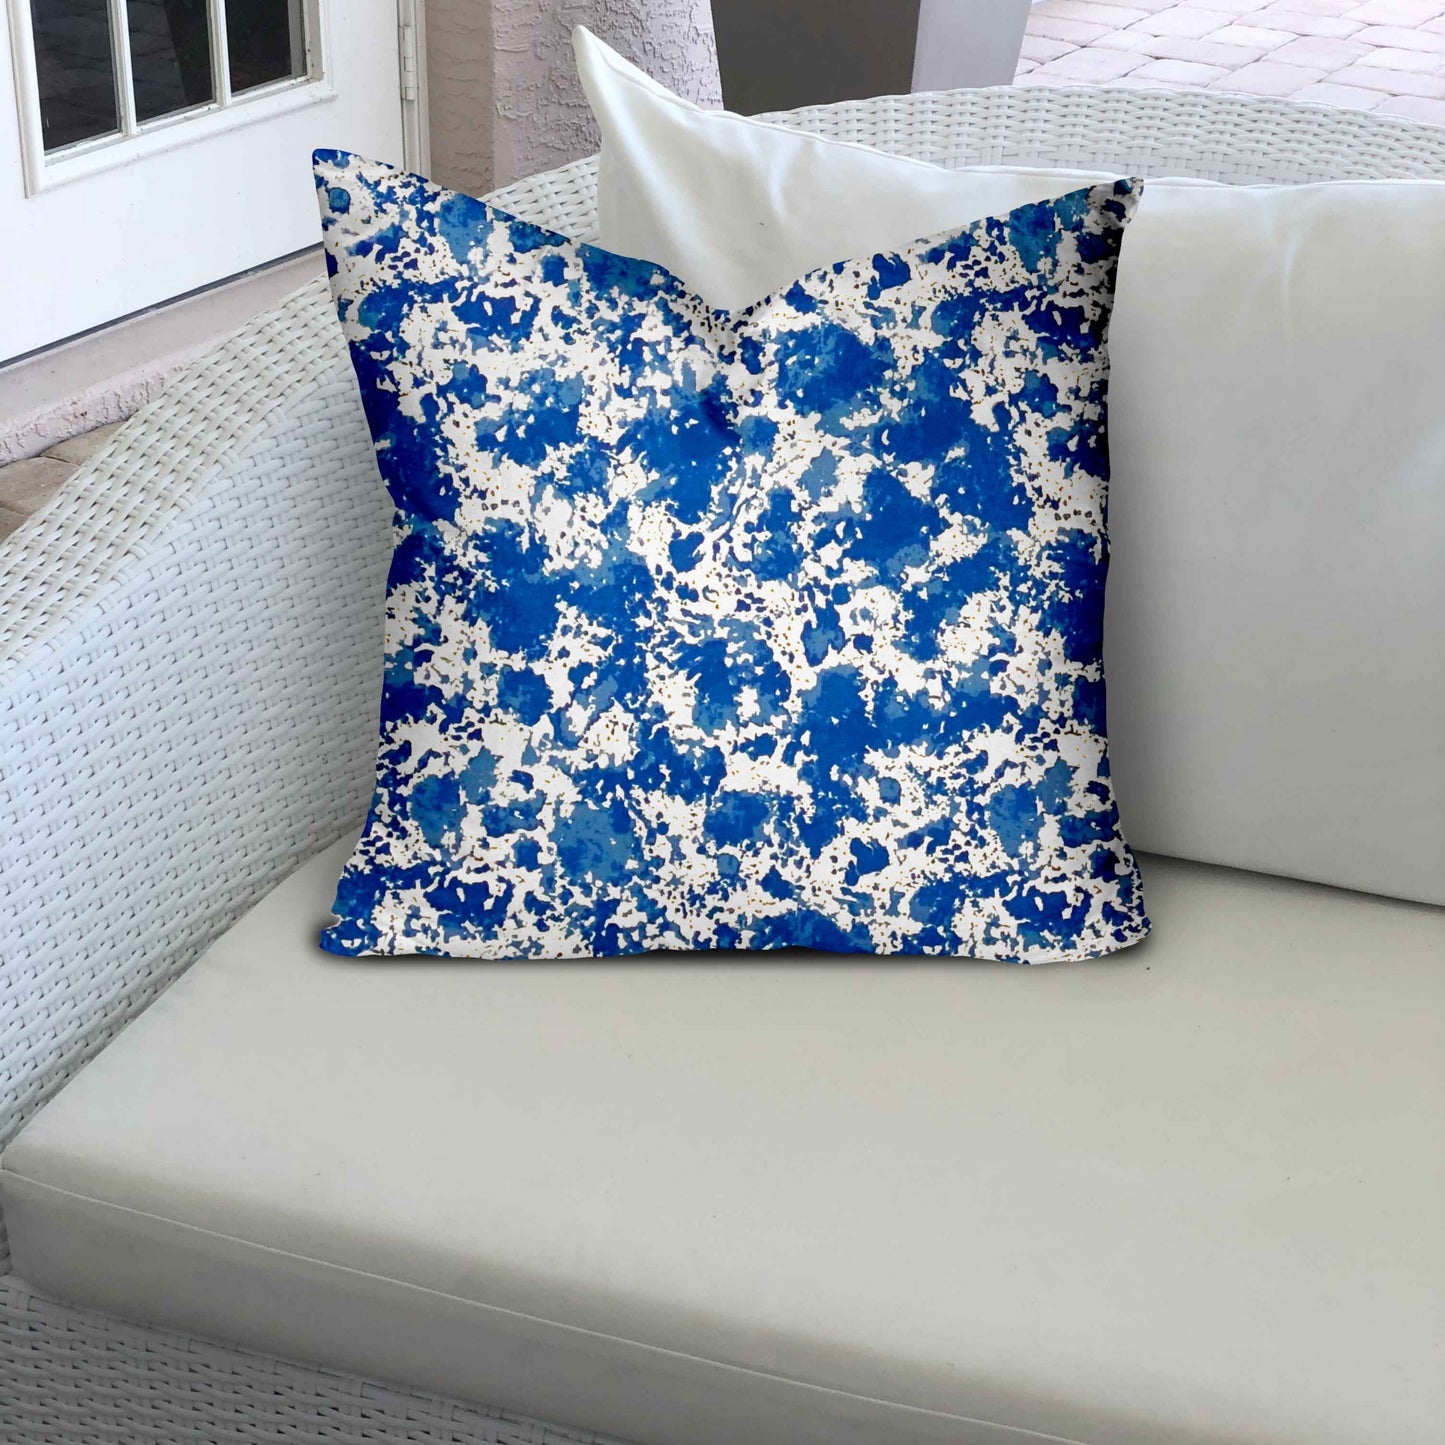 26" X 26" Blue And White Enveloped Coastal Throw Indoor Outdoor Pillow Cover